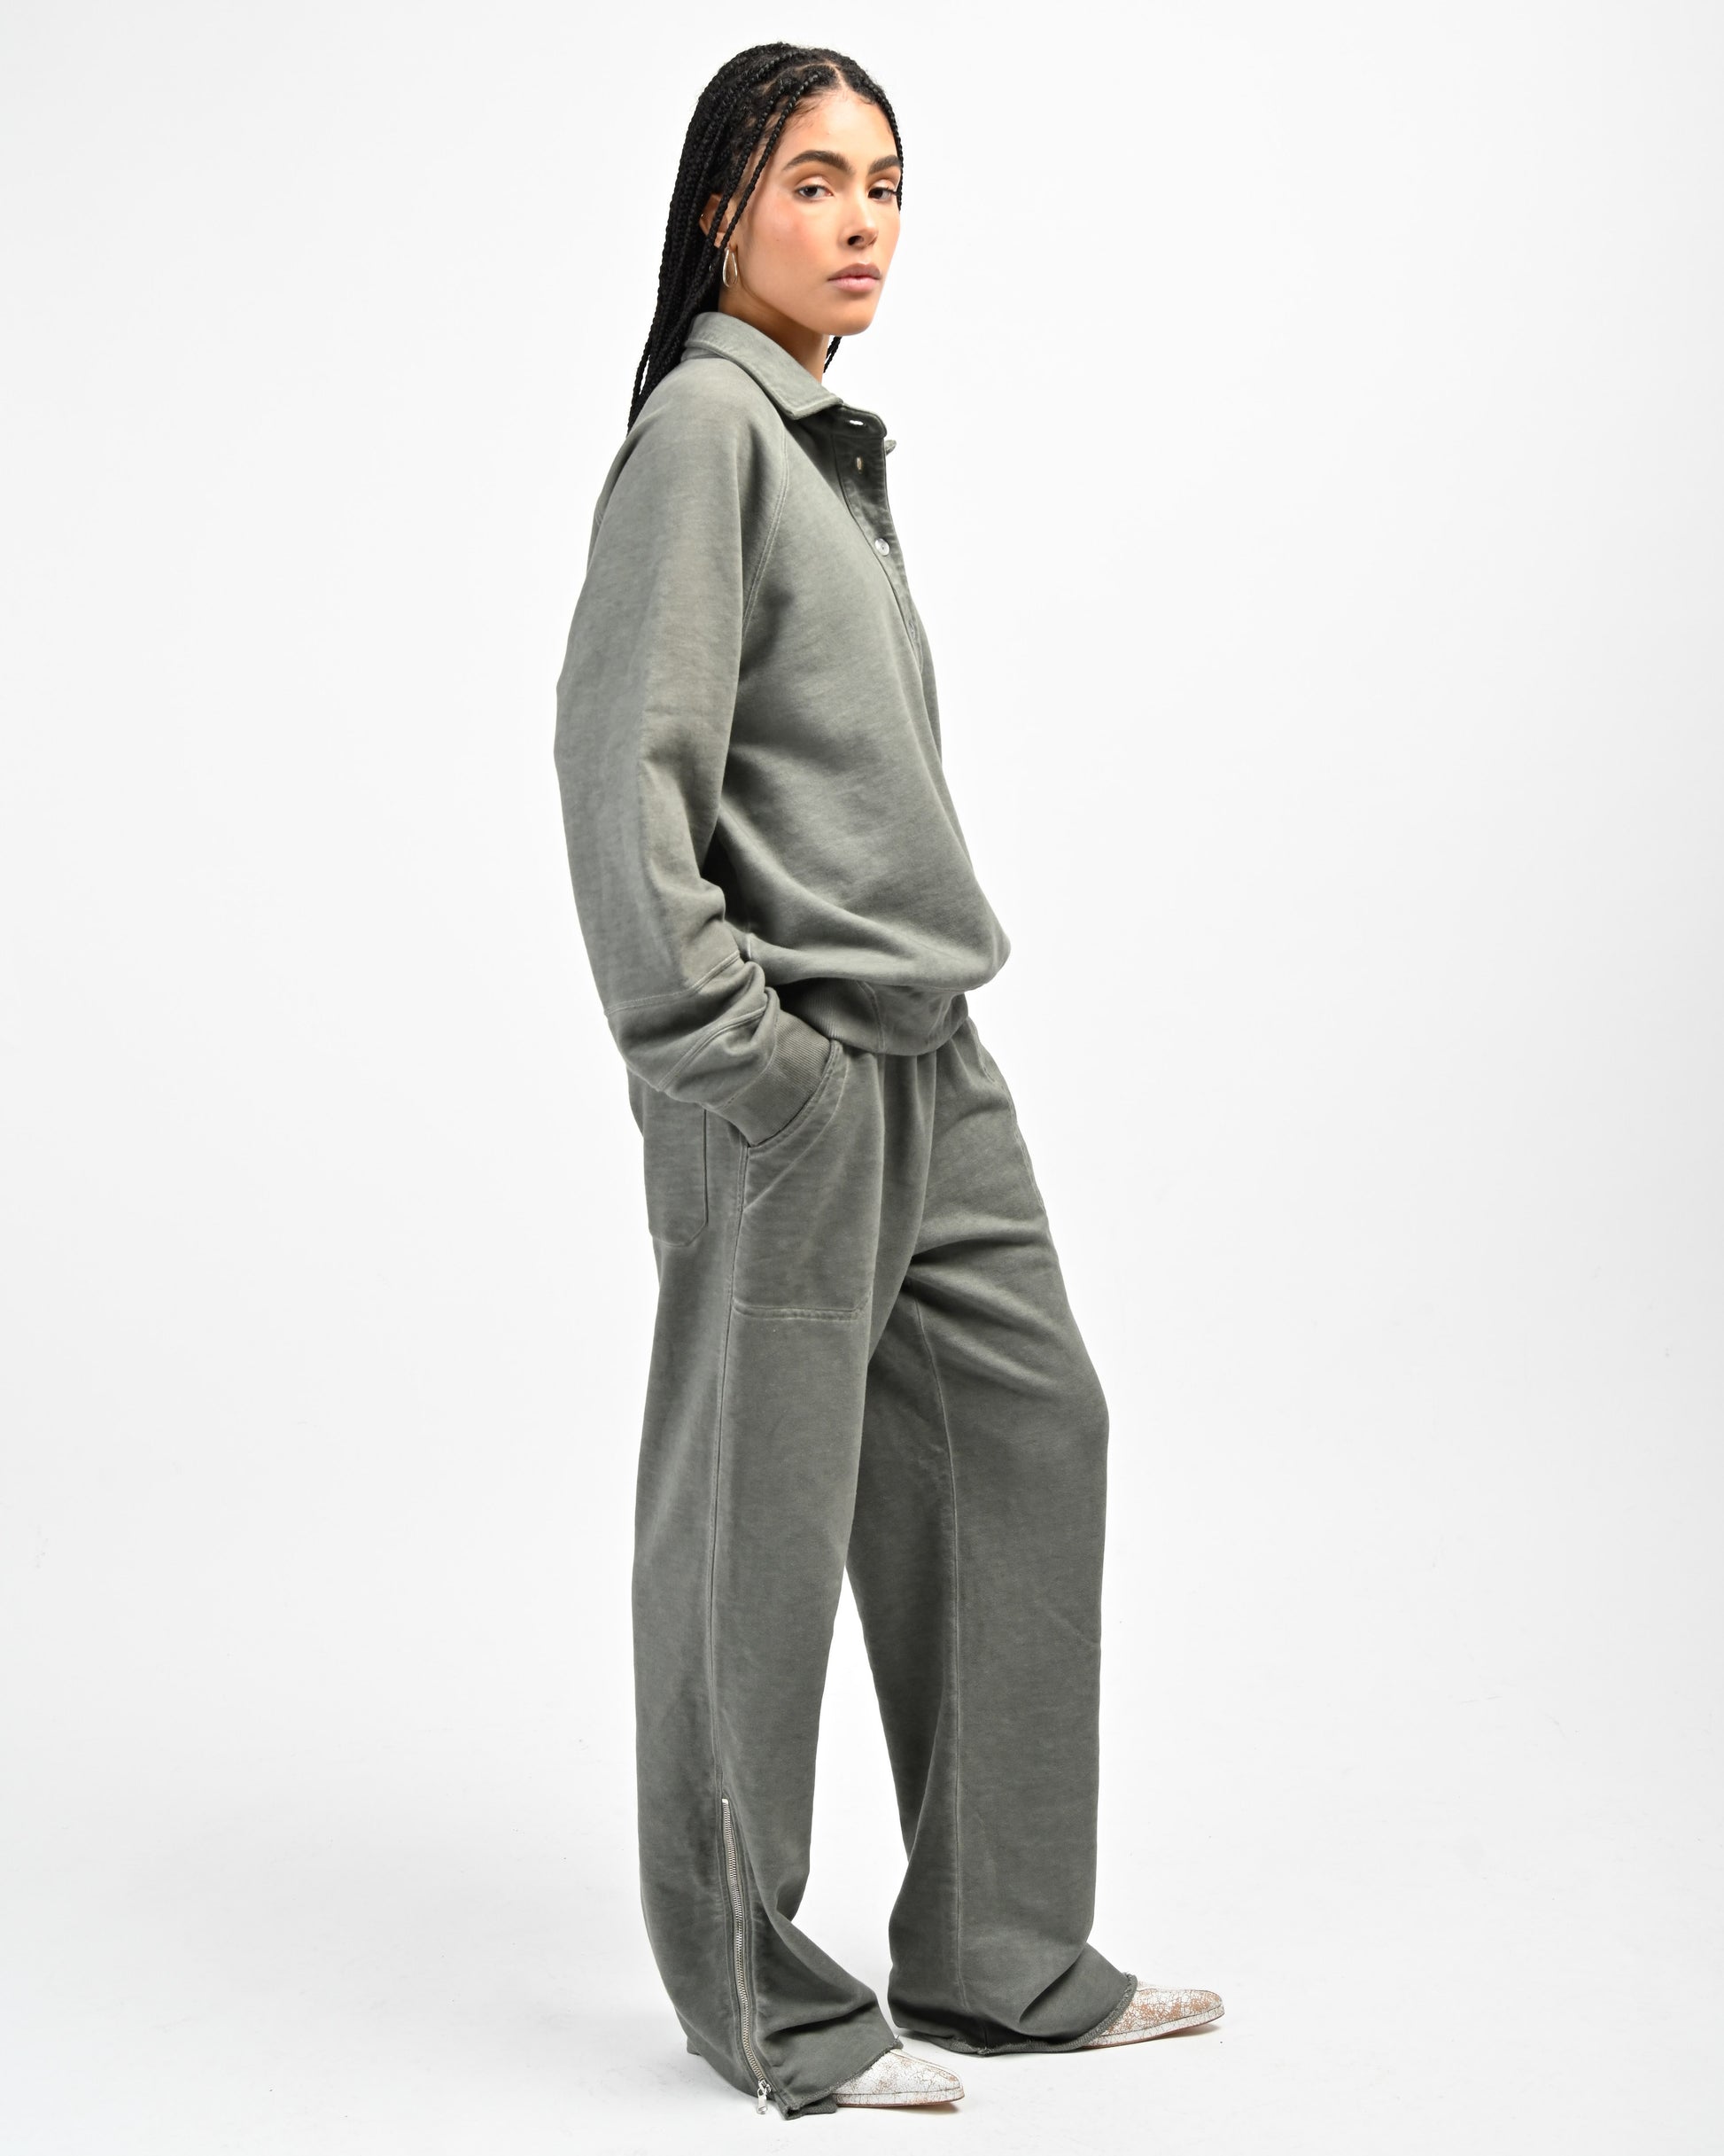 Model is wearing August Pullover sweatshirt and Allora Track Pant in Muted Green by Aseye Studio